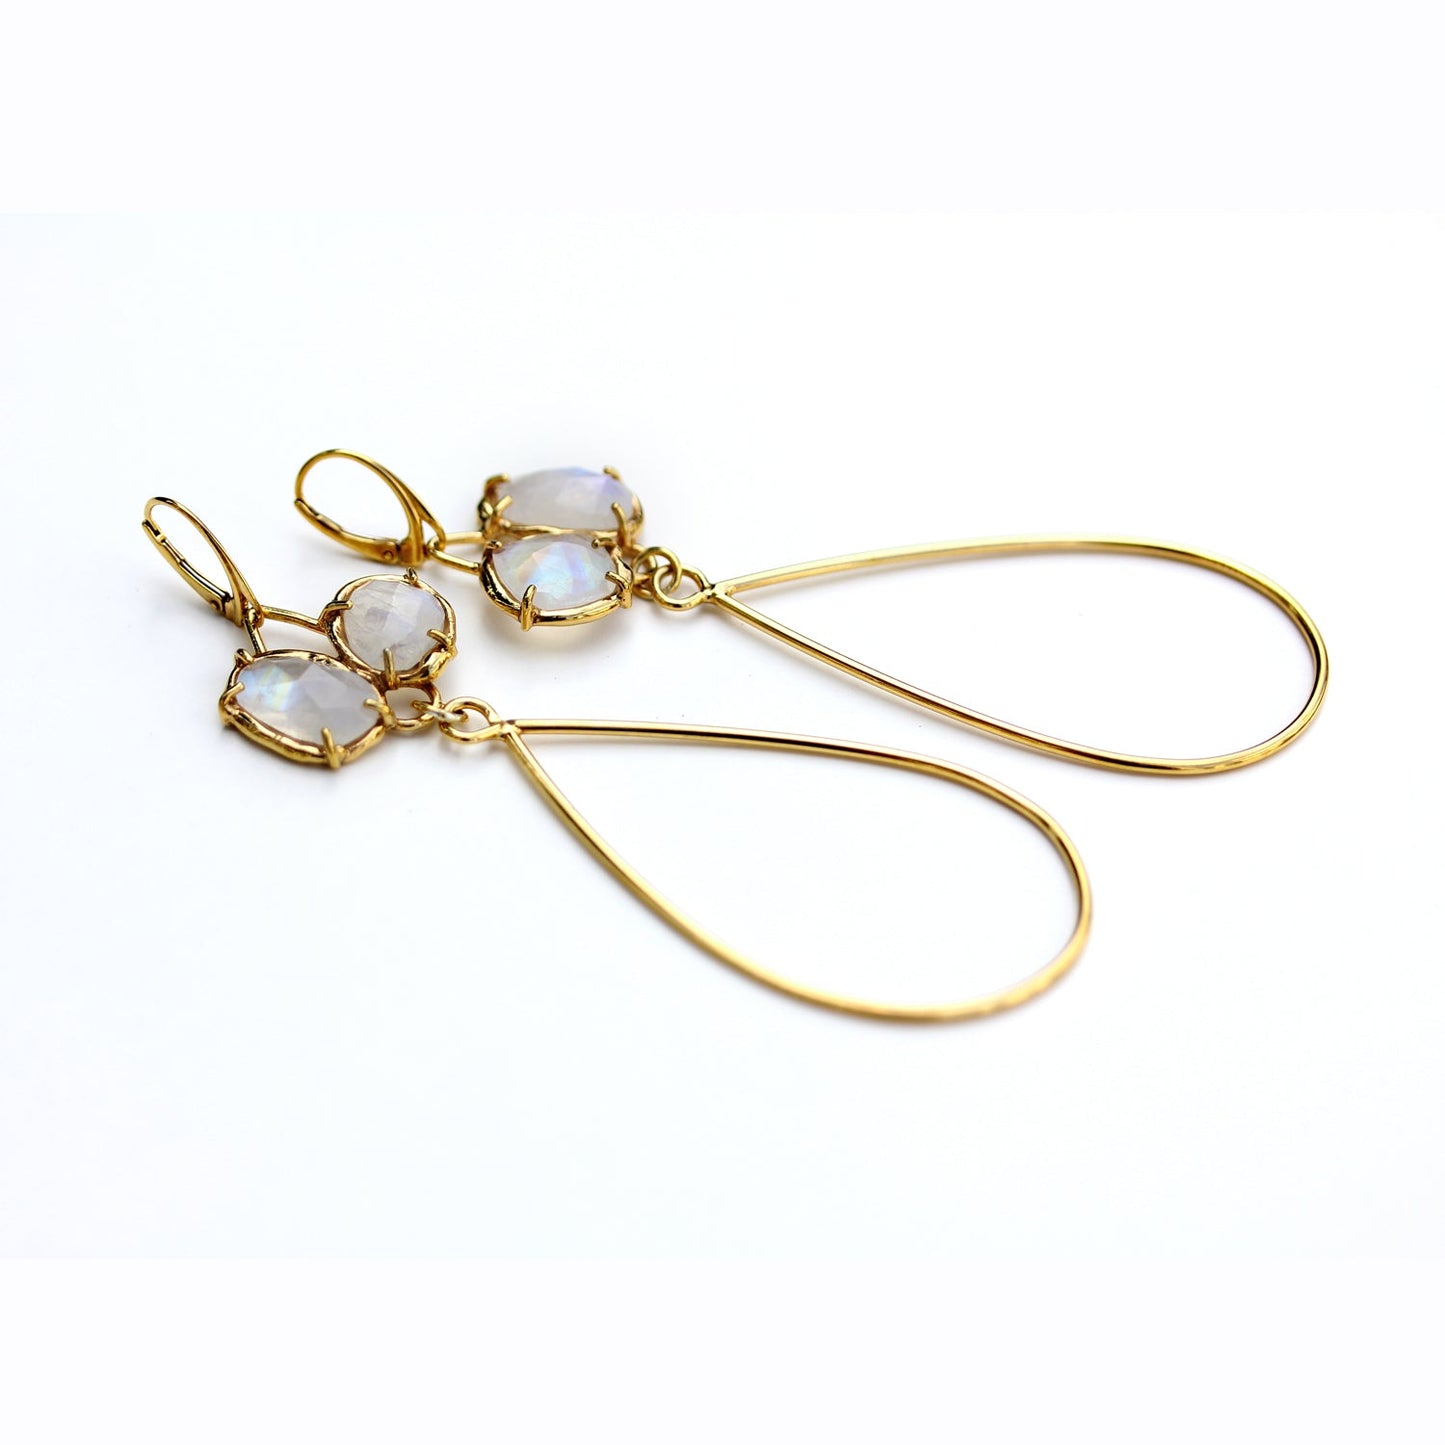 Handmade Adele Earrings in Gold Plated Sterling with Moonstone by Katie Poterala Jewelry